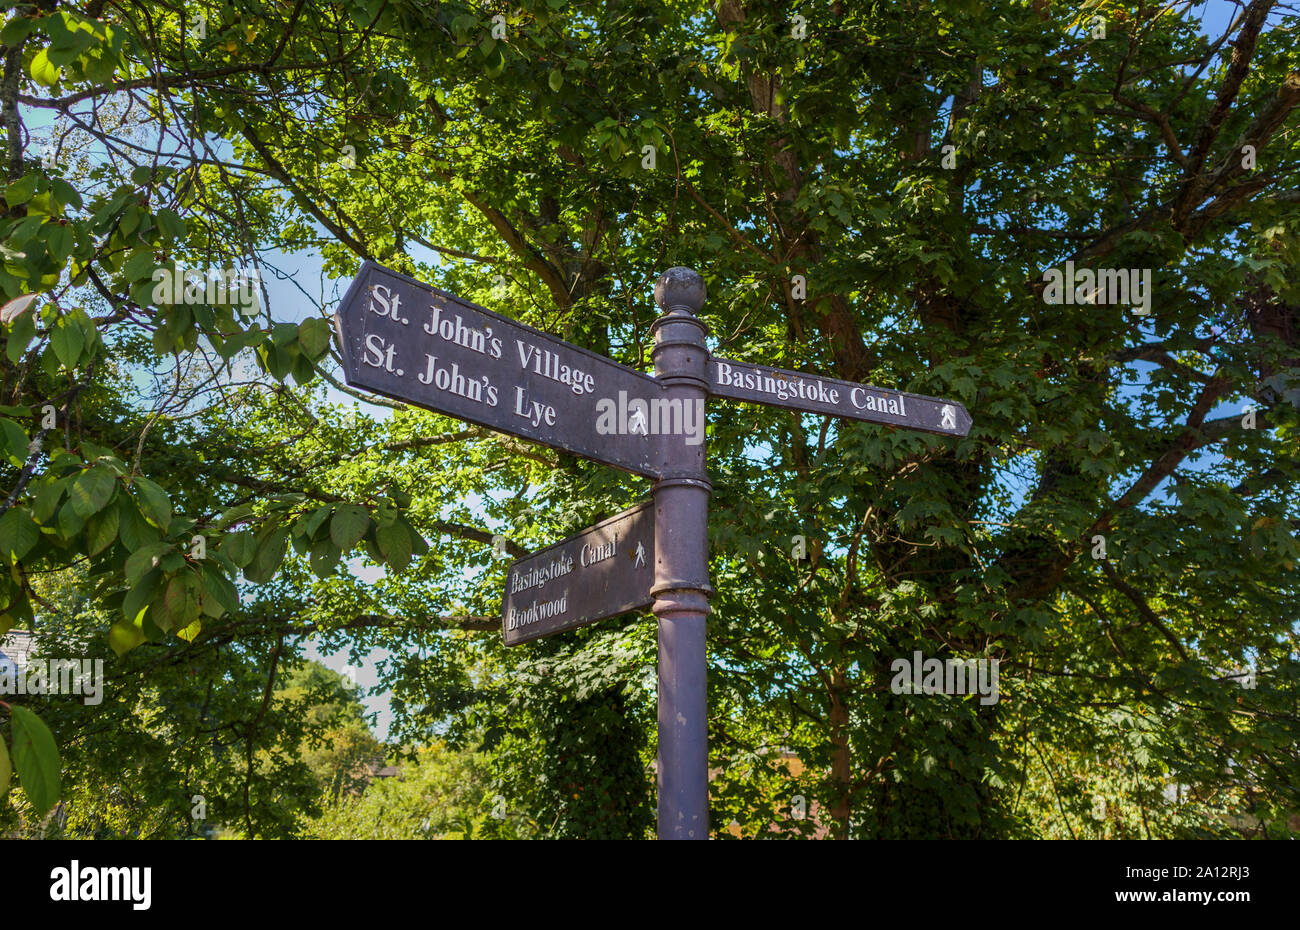 A fingerpost on a public footpath by the Basingstoke Canal, St Johns, a village near Woking, Surrey, SE England, pointing to local places of interest Stock Photo